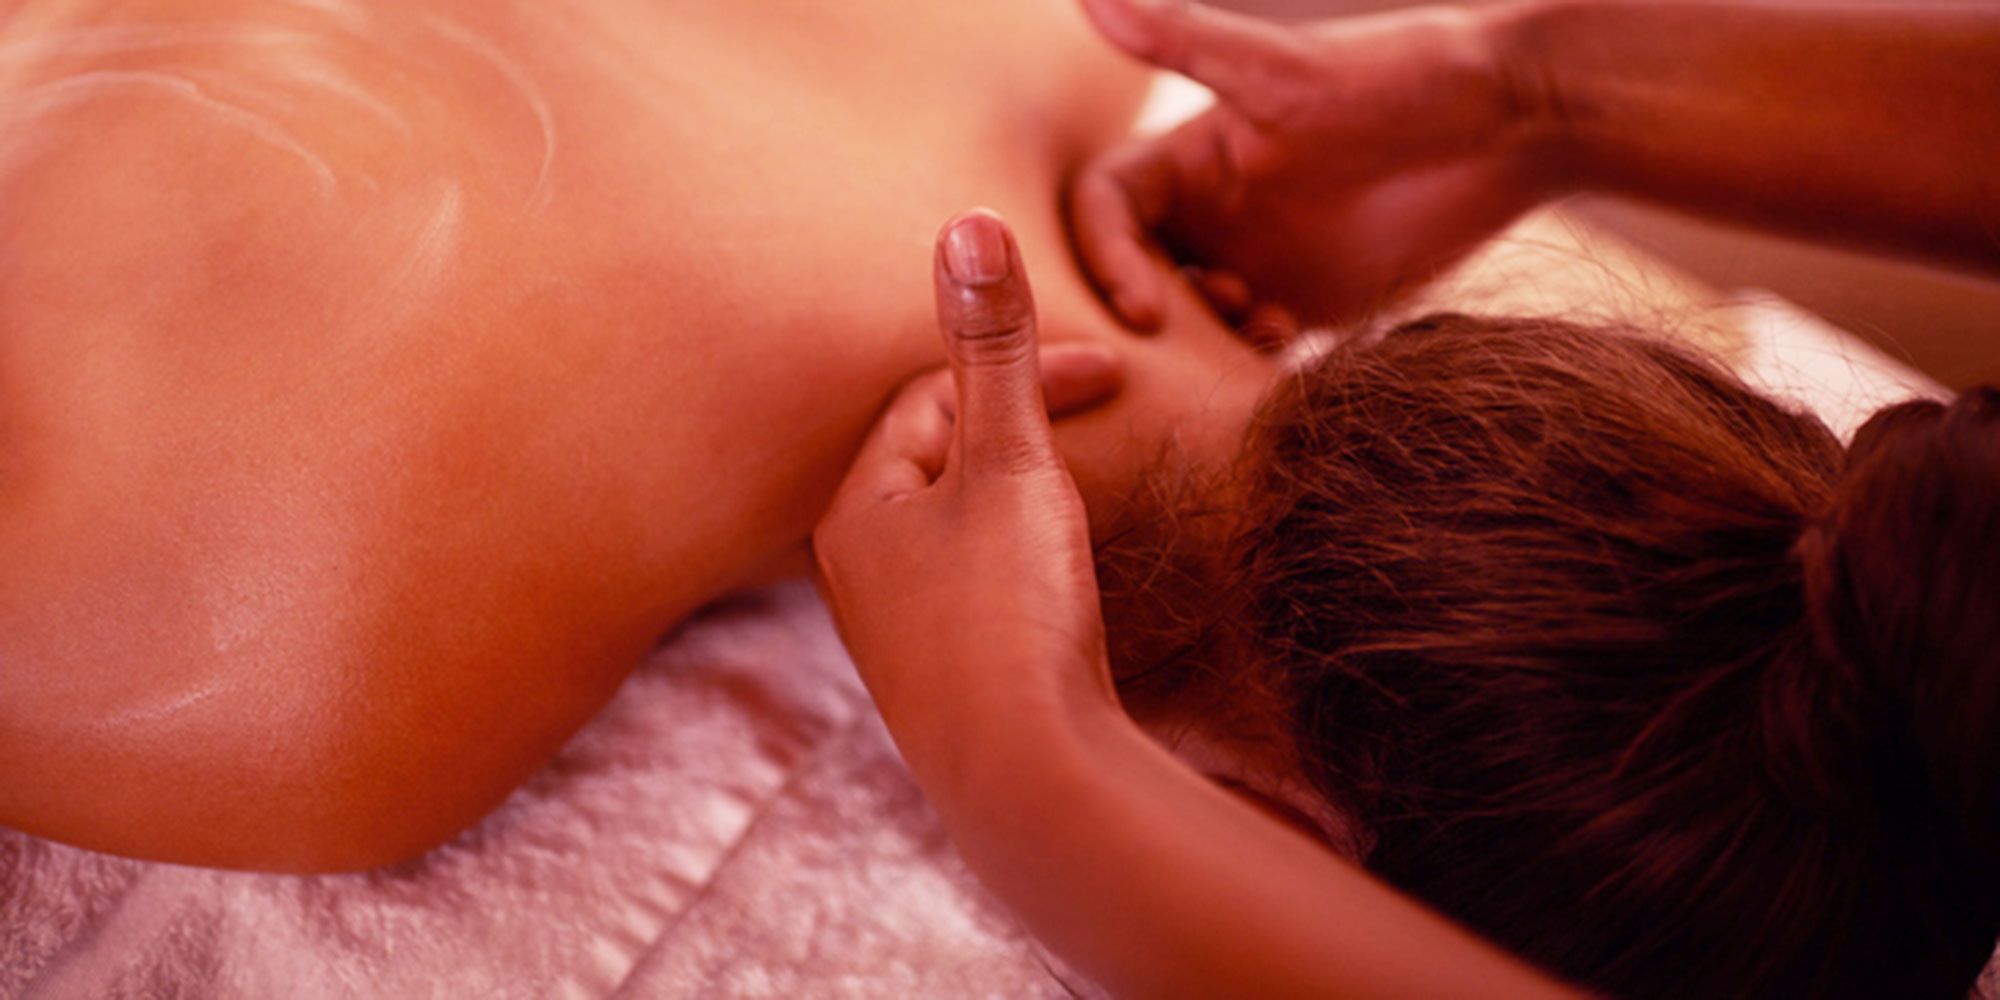 Orgasmic massage stories from women who pay a stranger photo